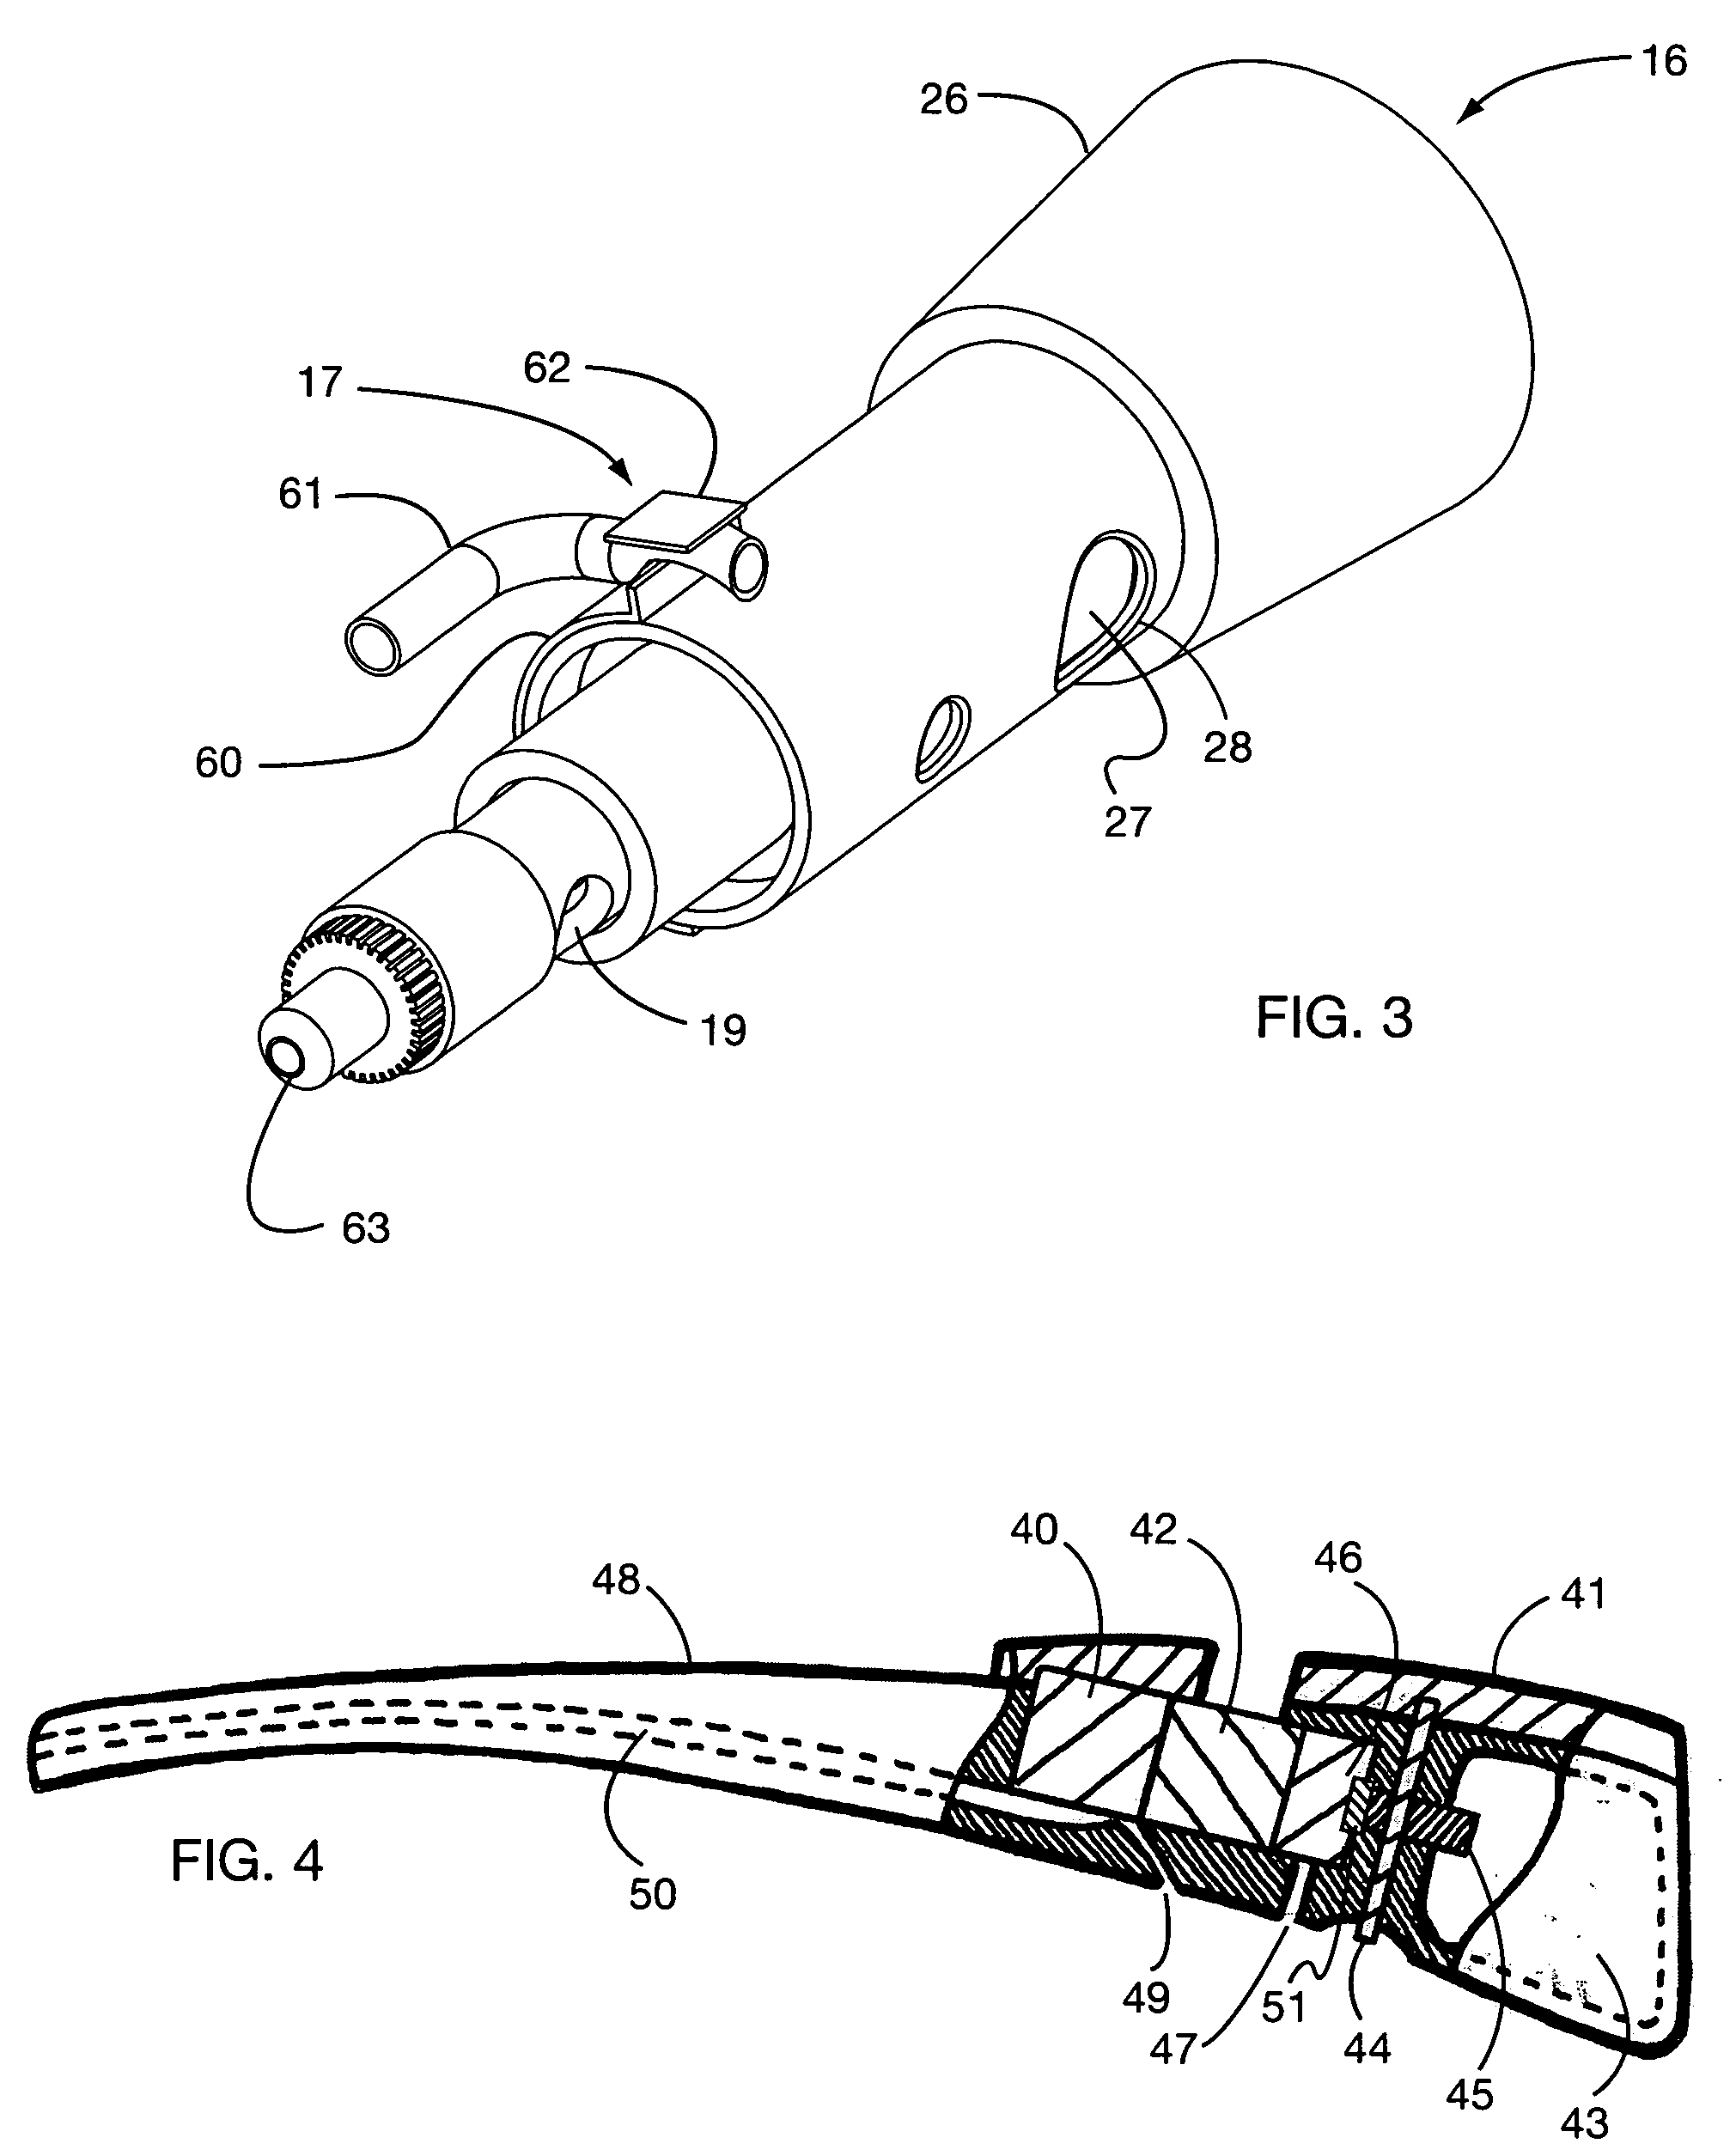 Method and system for vaporization of a substance